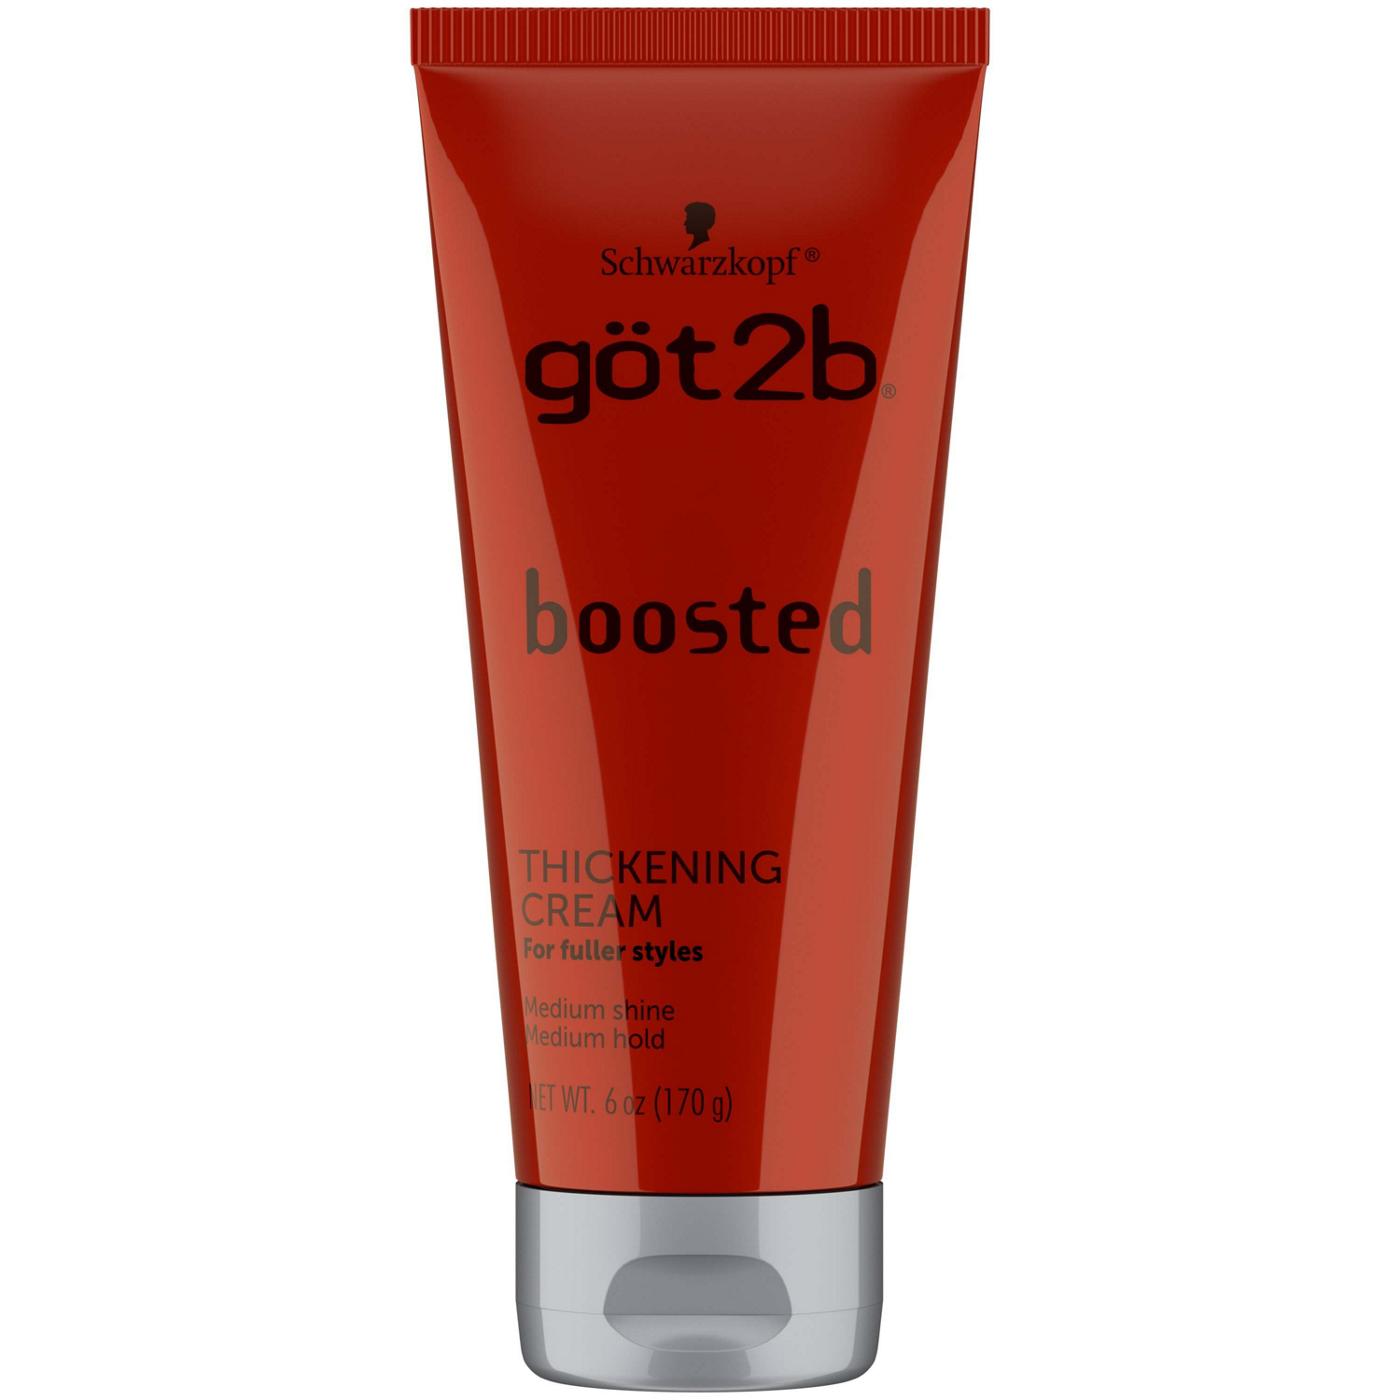 Got2b Boosted Thickening Cream; image 1 of 3